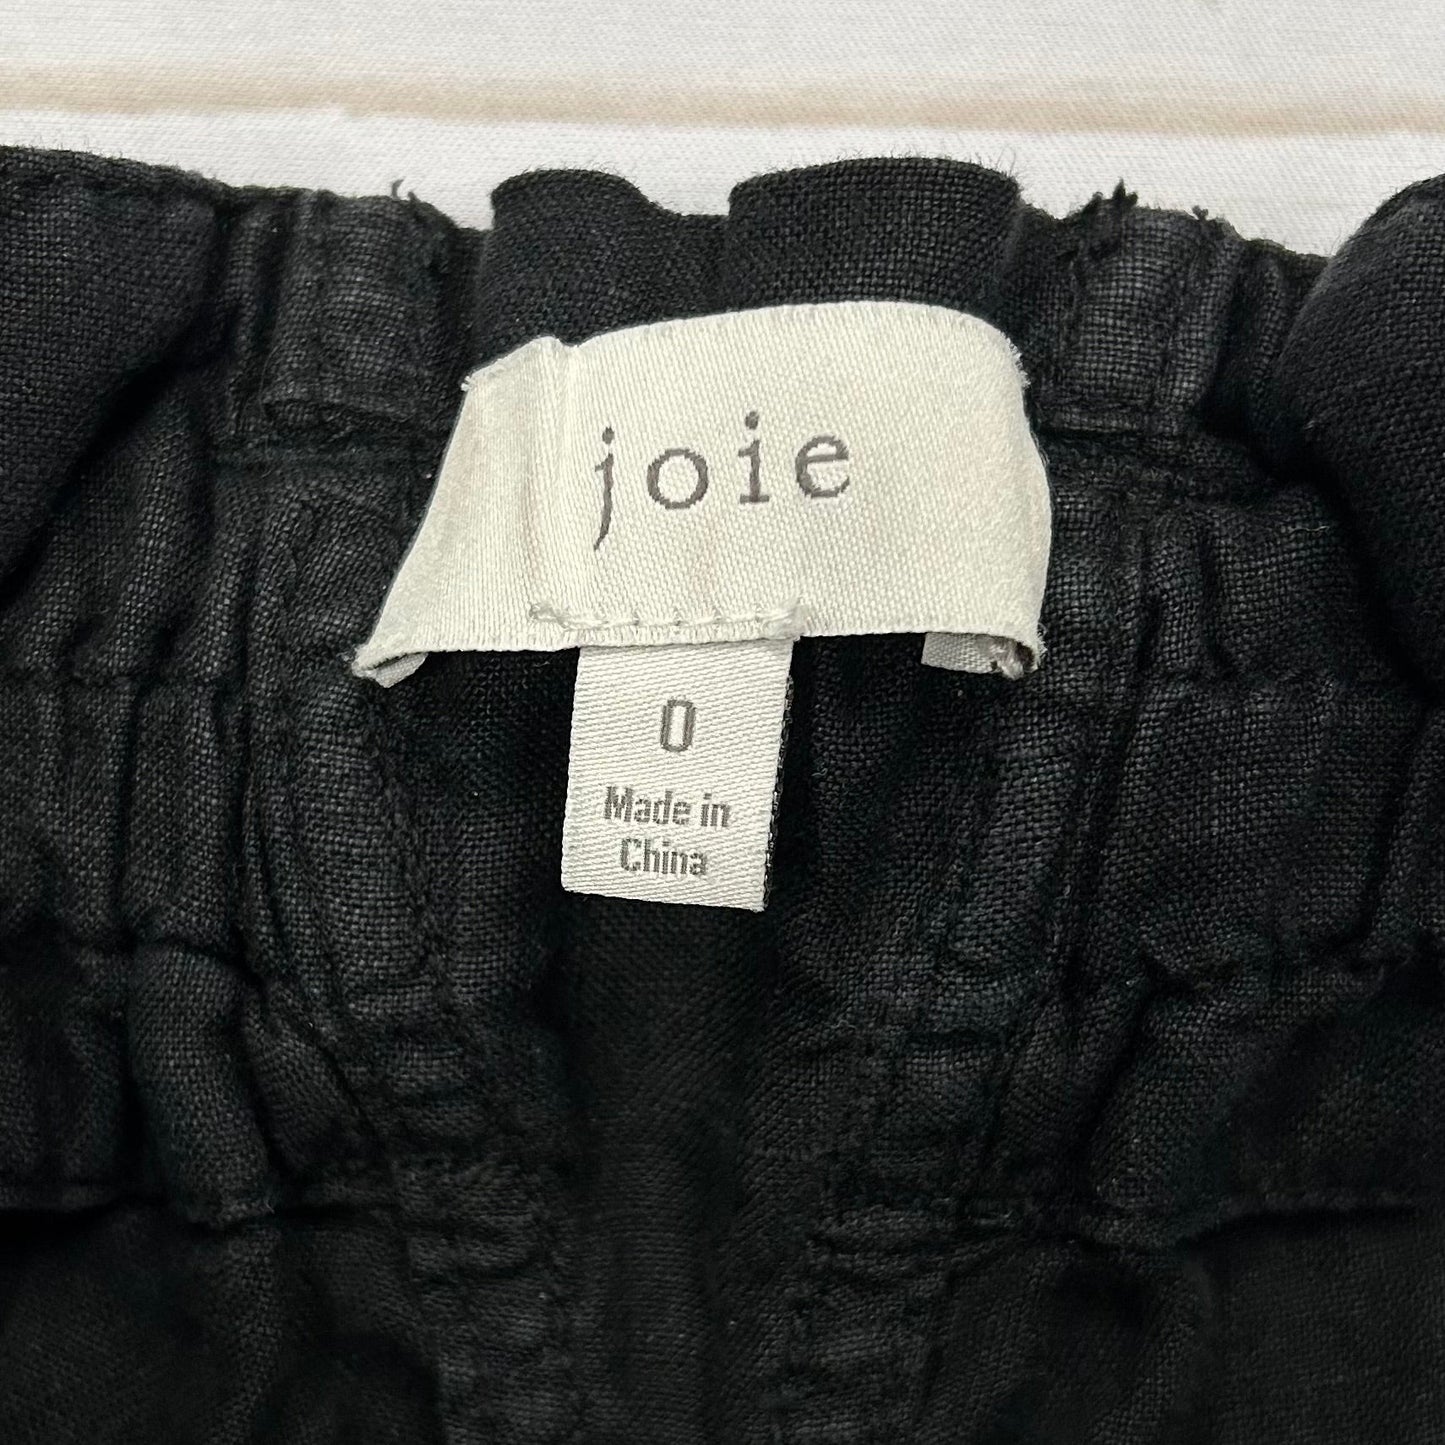 Shorts By Joie  Size: 0